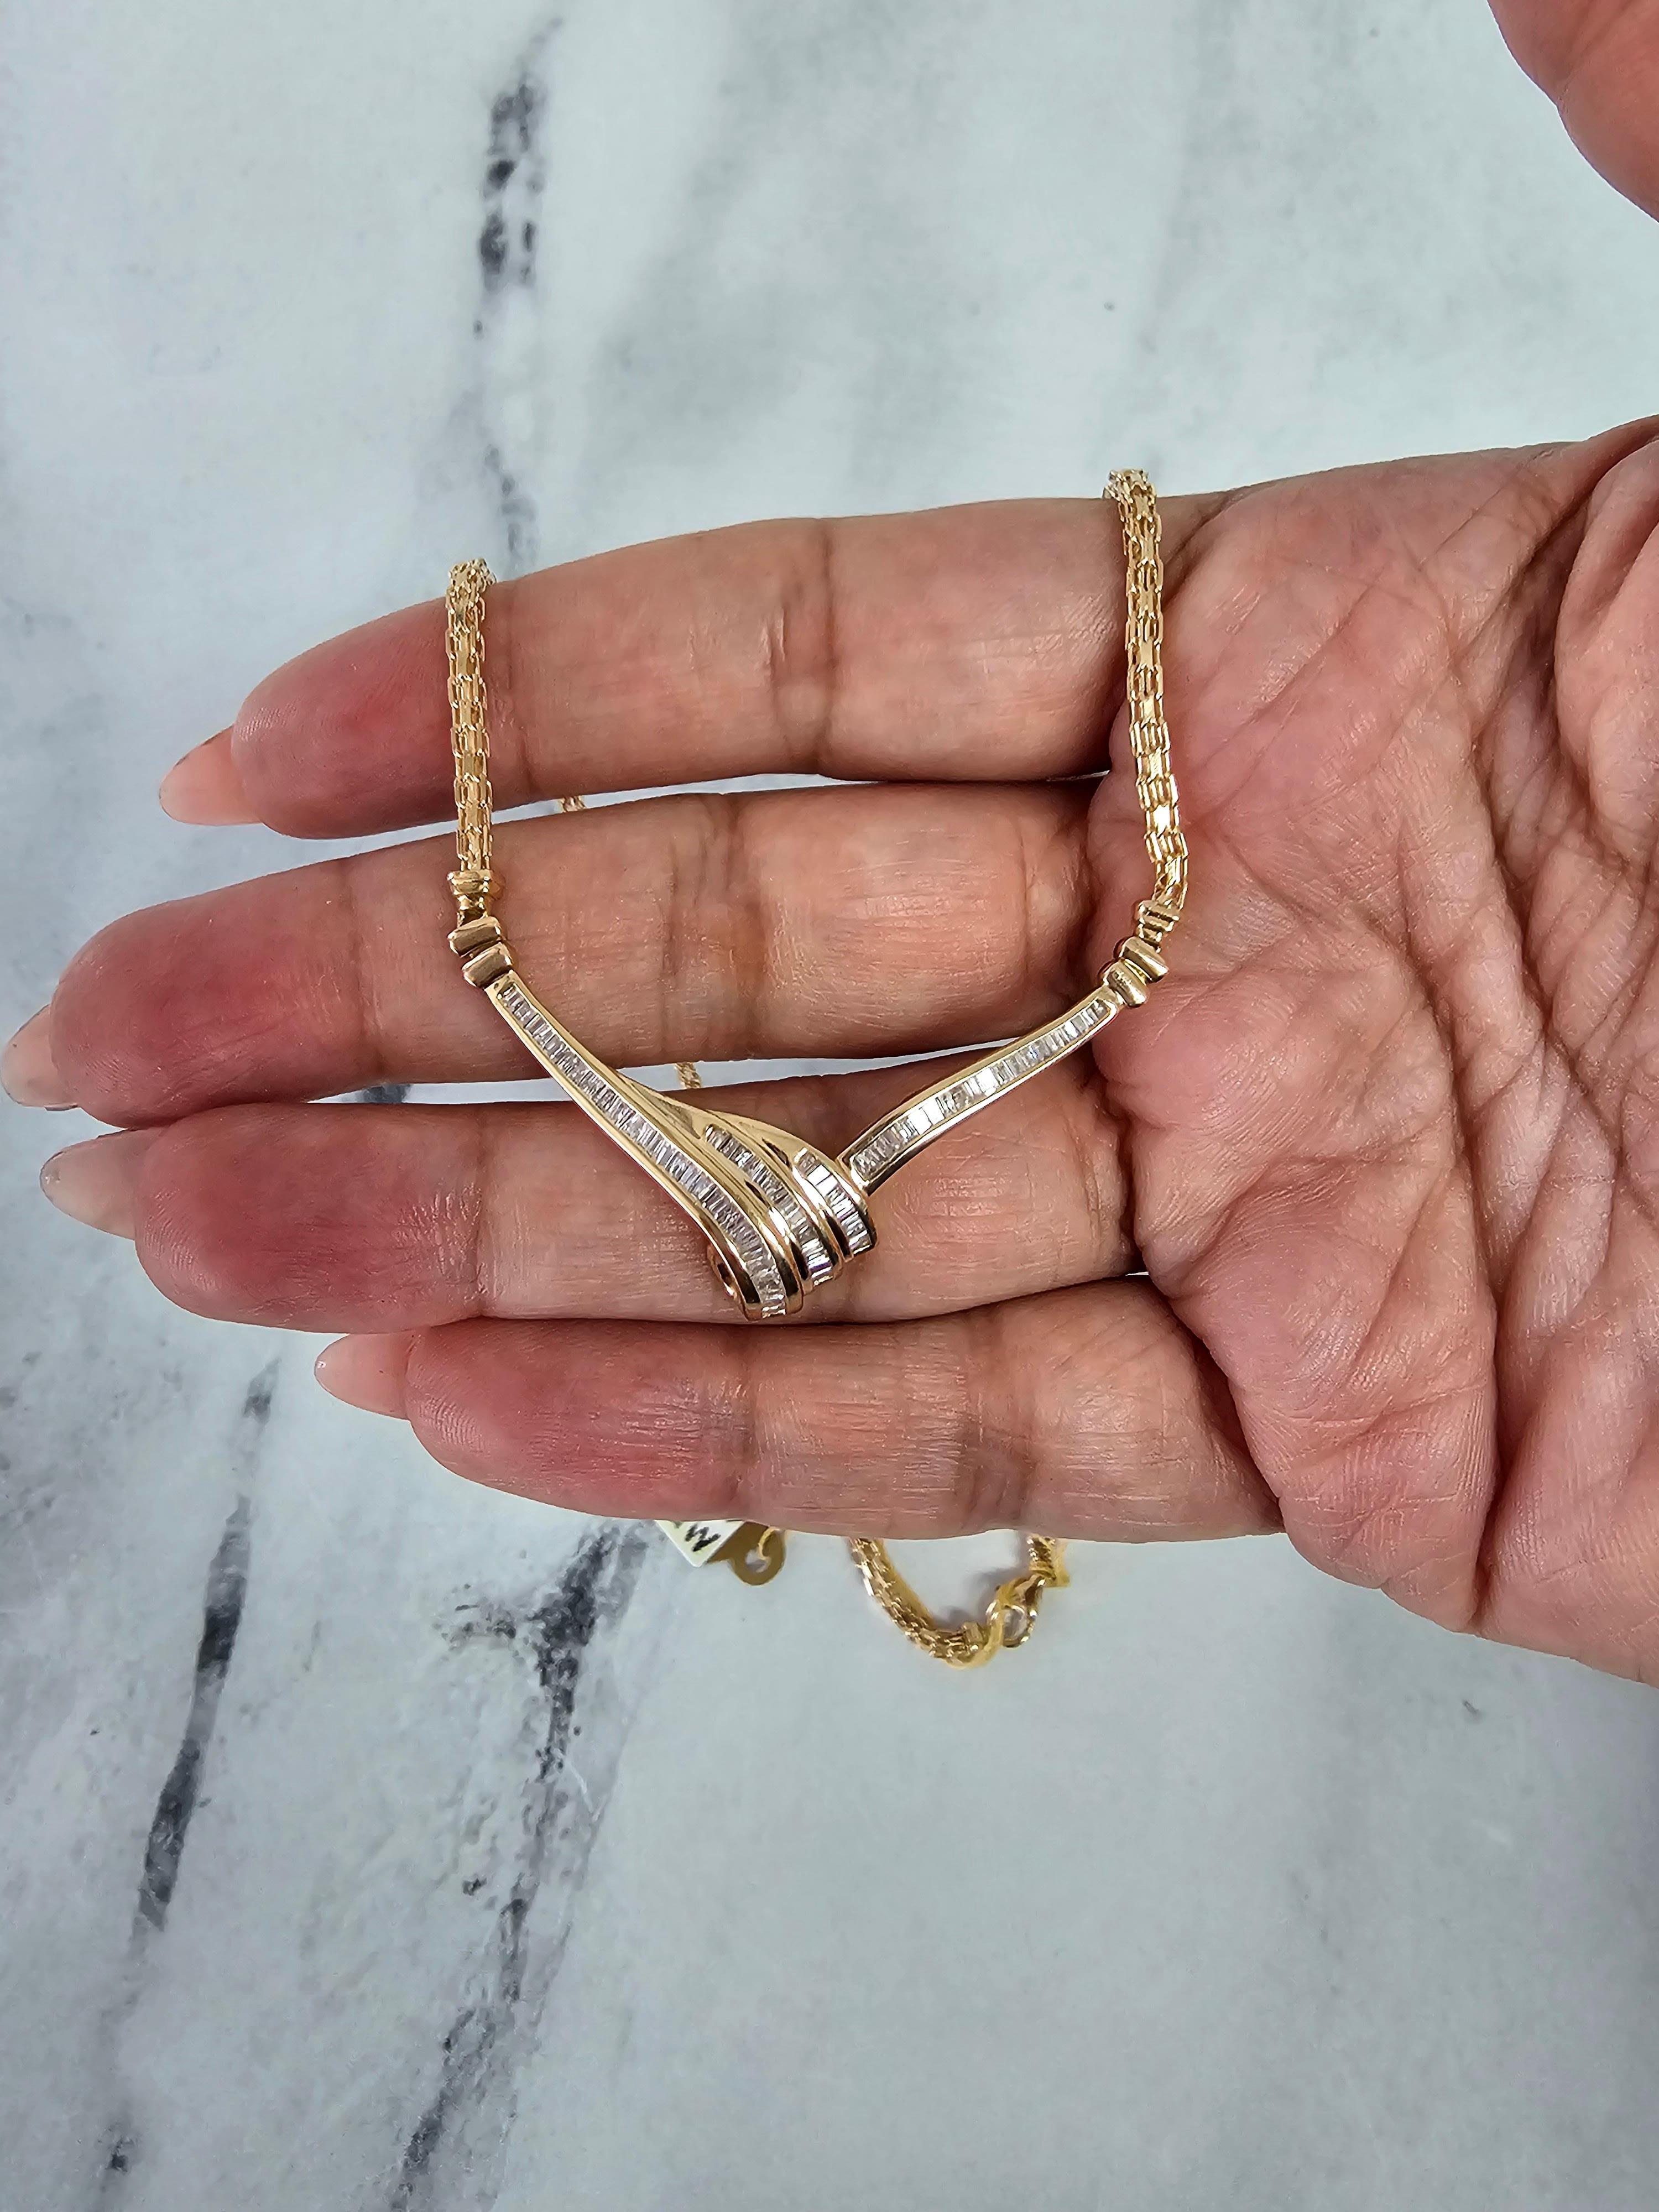 ♥ Product Summary ♥

Main Stone: Diamond
Approx. Carat Weight: .96cttw
Diamond Color: H/I
Diamond Clarity: SI2/SI3
Stone Cut: Baguette  
Material: 14k Yellow Gold
Dimensions: 30mm x 50mm
Chain: Wheat Chain
Weight: 13 grams
Length: 16 inches